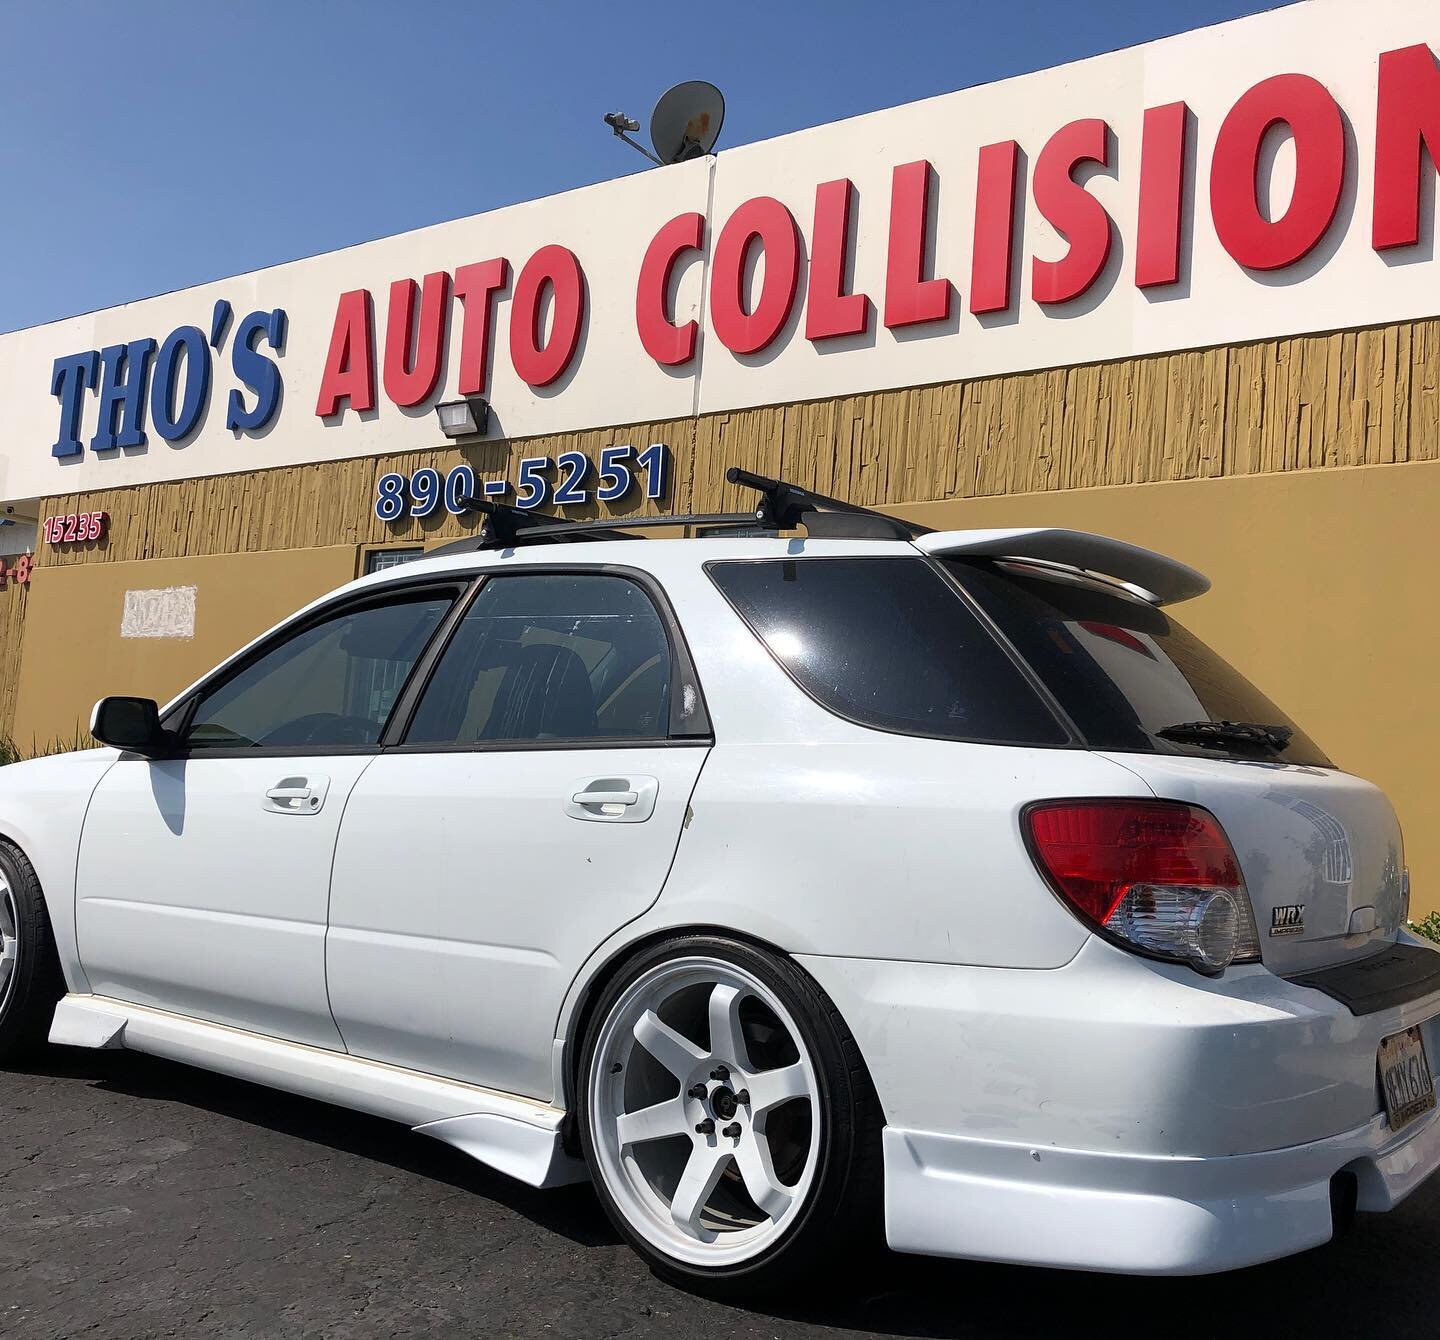 The owner of this subaru is one of the best! He trusted us with his baby and allowed us to do pretty much whatever we felt was best. #NoExpectations so thank you #Subaru #TrustIsImportant #WeAlmostSwitchedHisTrannyThough #Vtec jk 🥴🥴#thosautocollisi